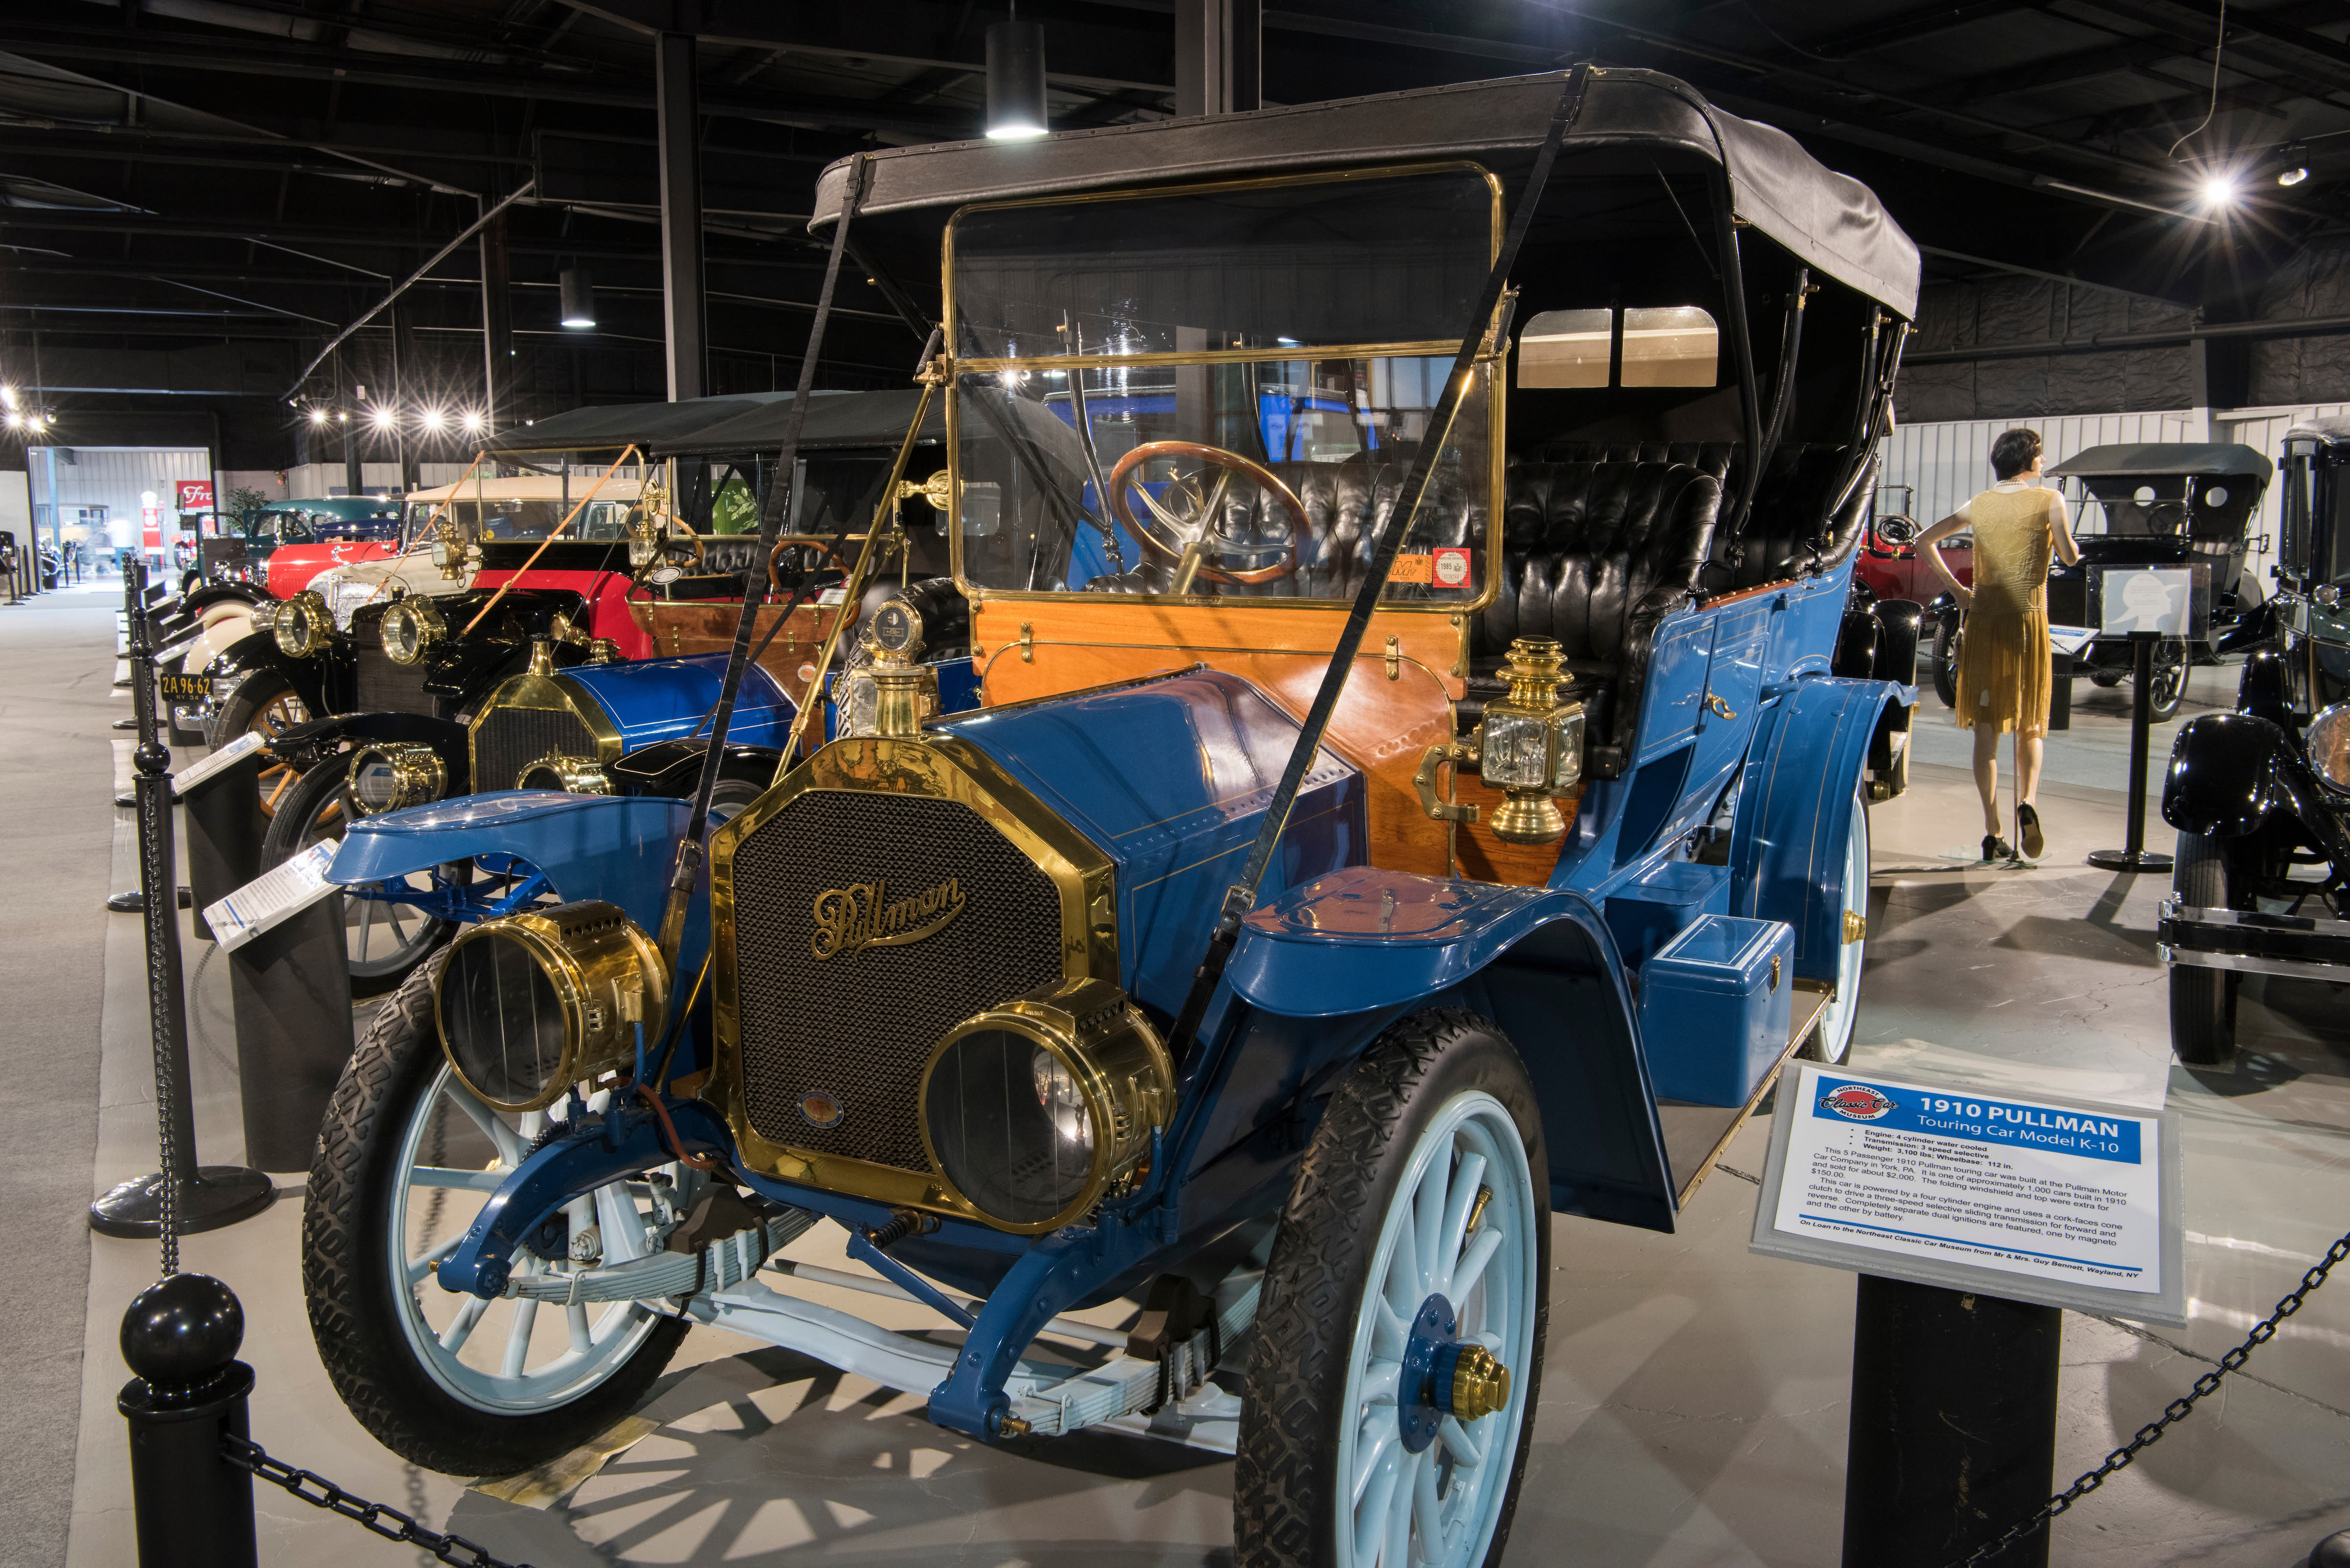 Northeast Classic Car Museum | Norwich, NY 13815